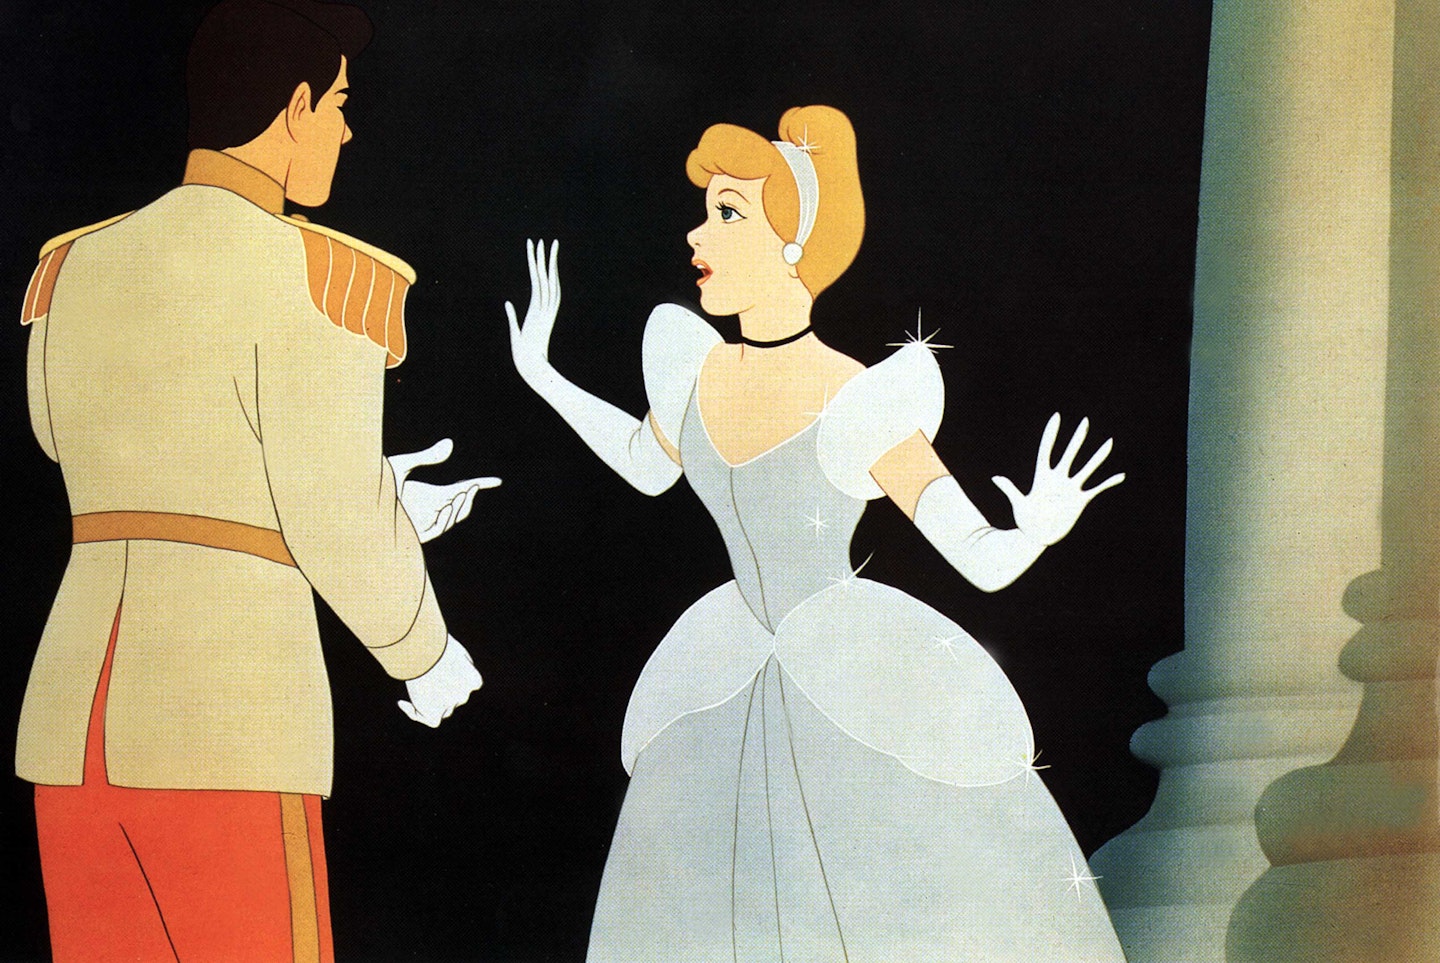 9 things you didn't know about Disney's Cinderella